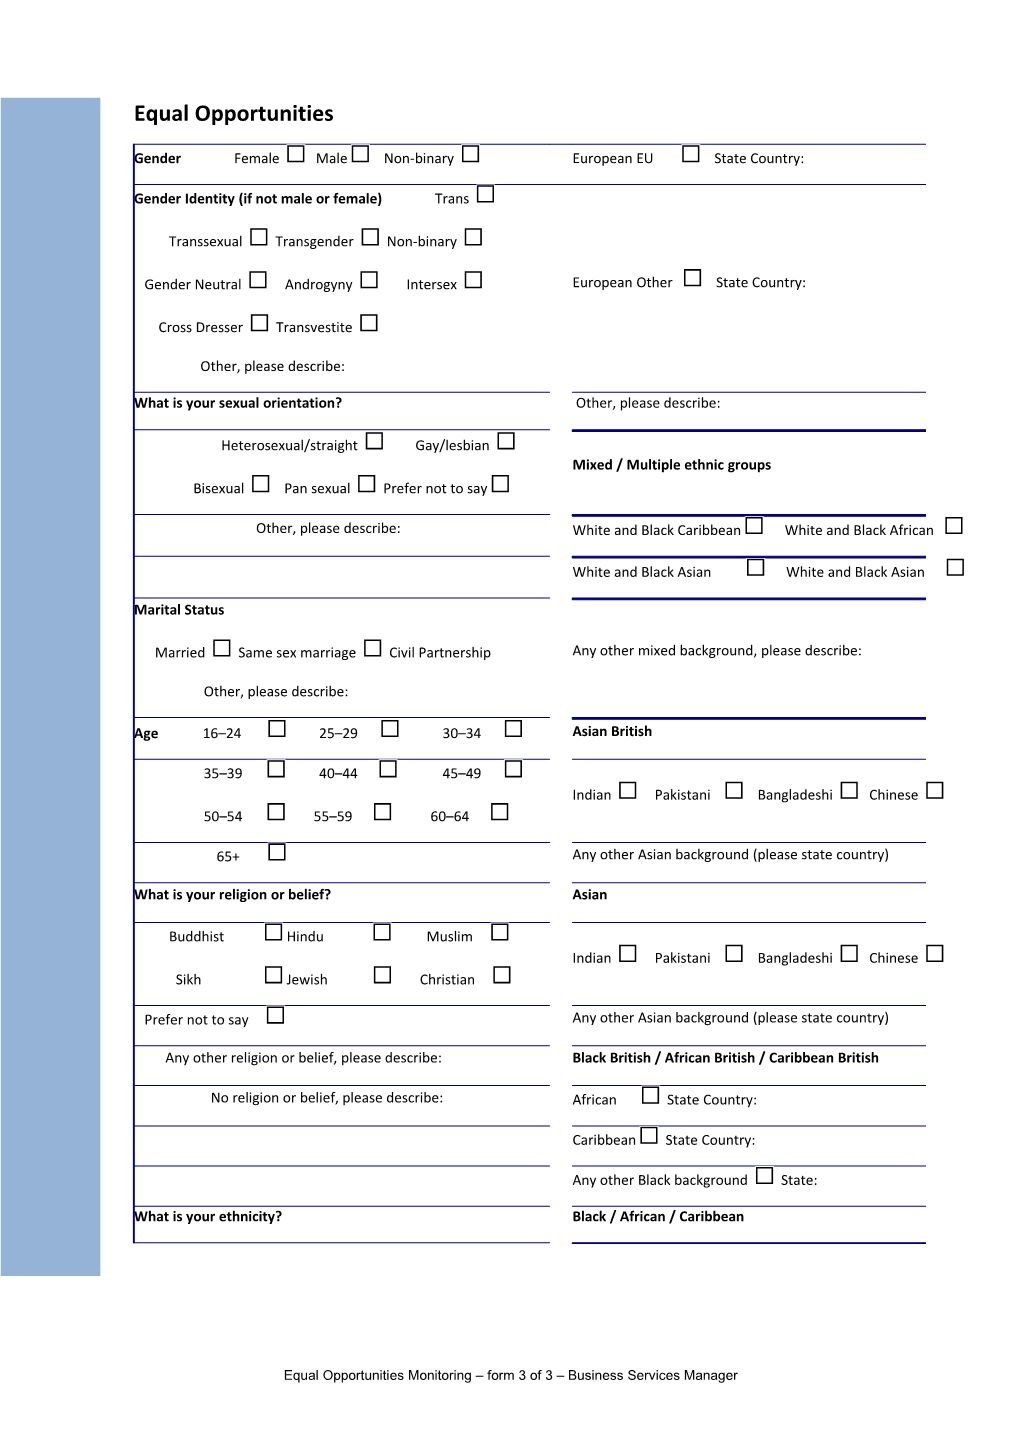 Equal Opportunities Monitoring Form 3 of 3 Business Services Manager